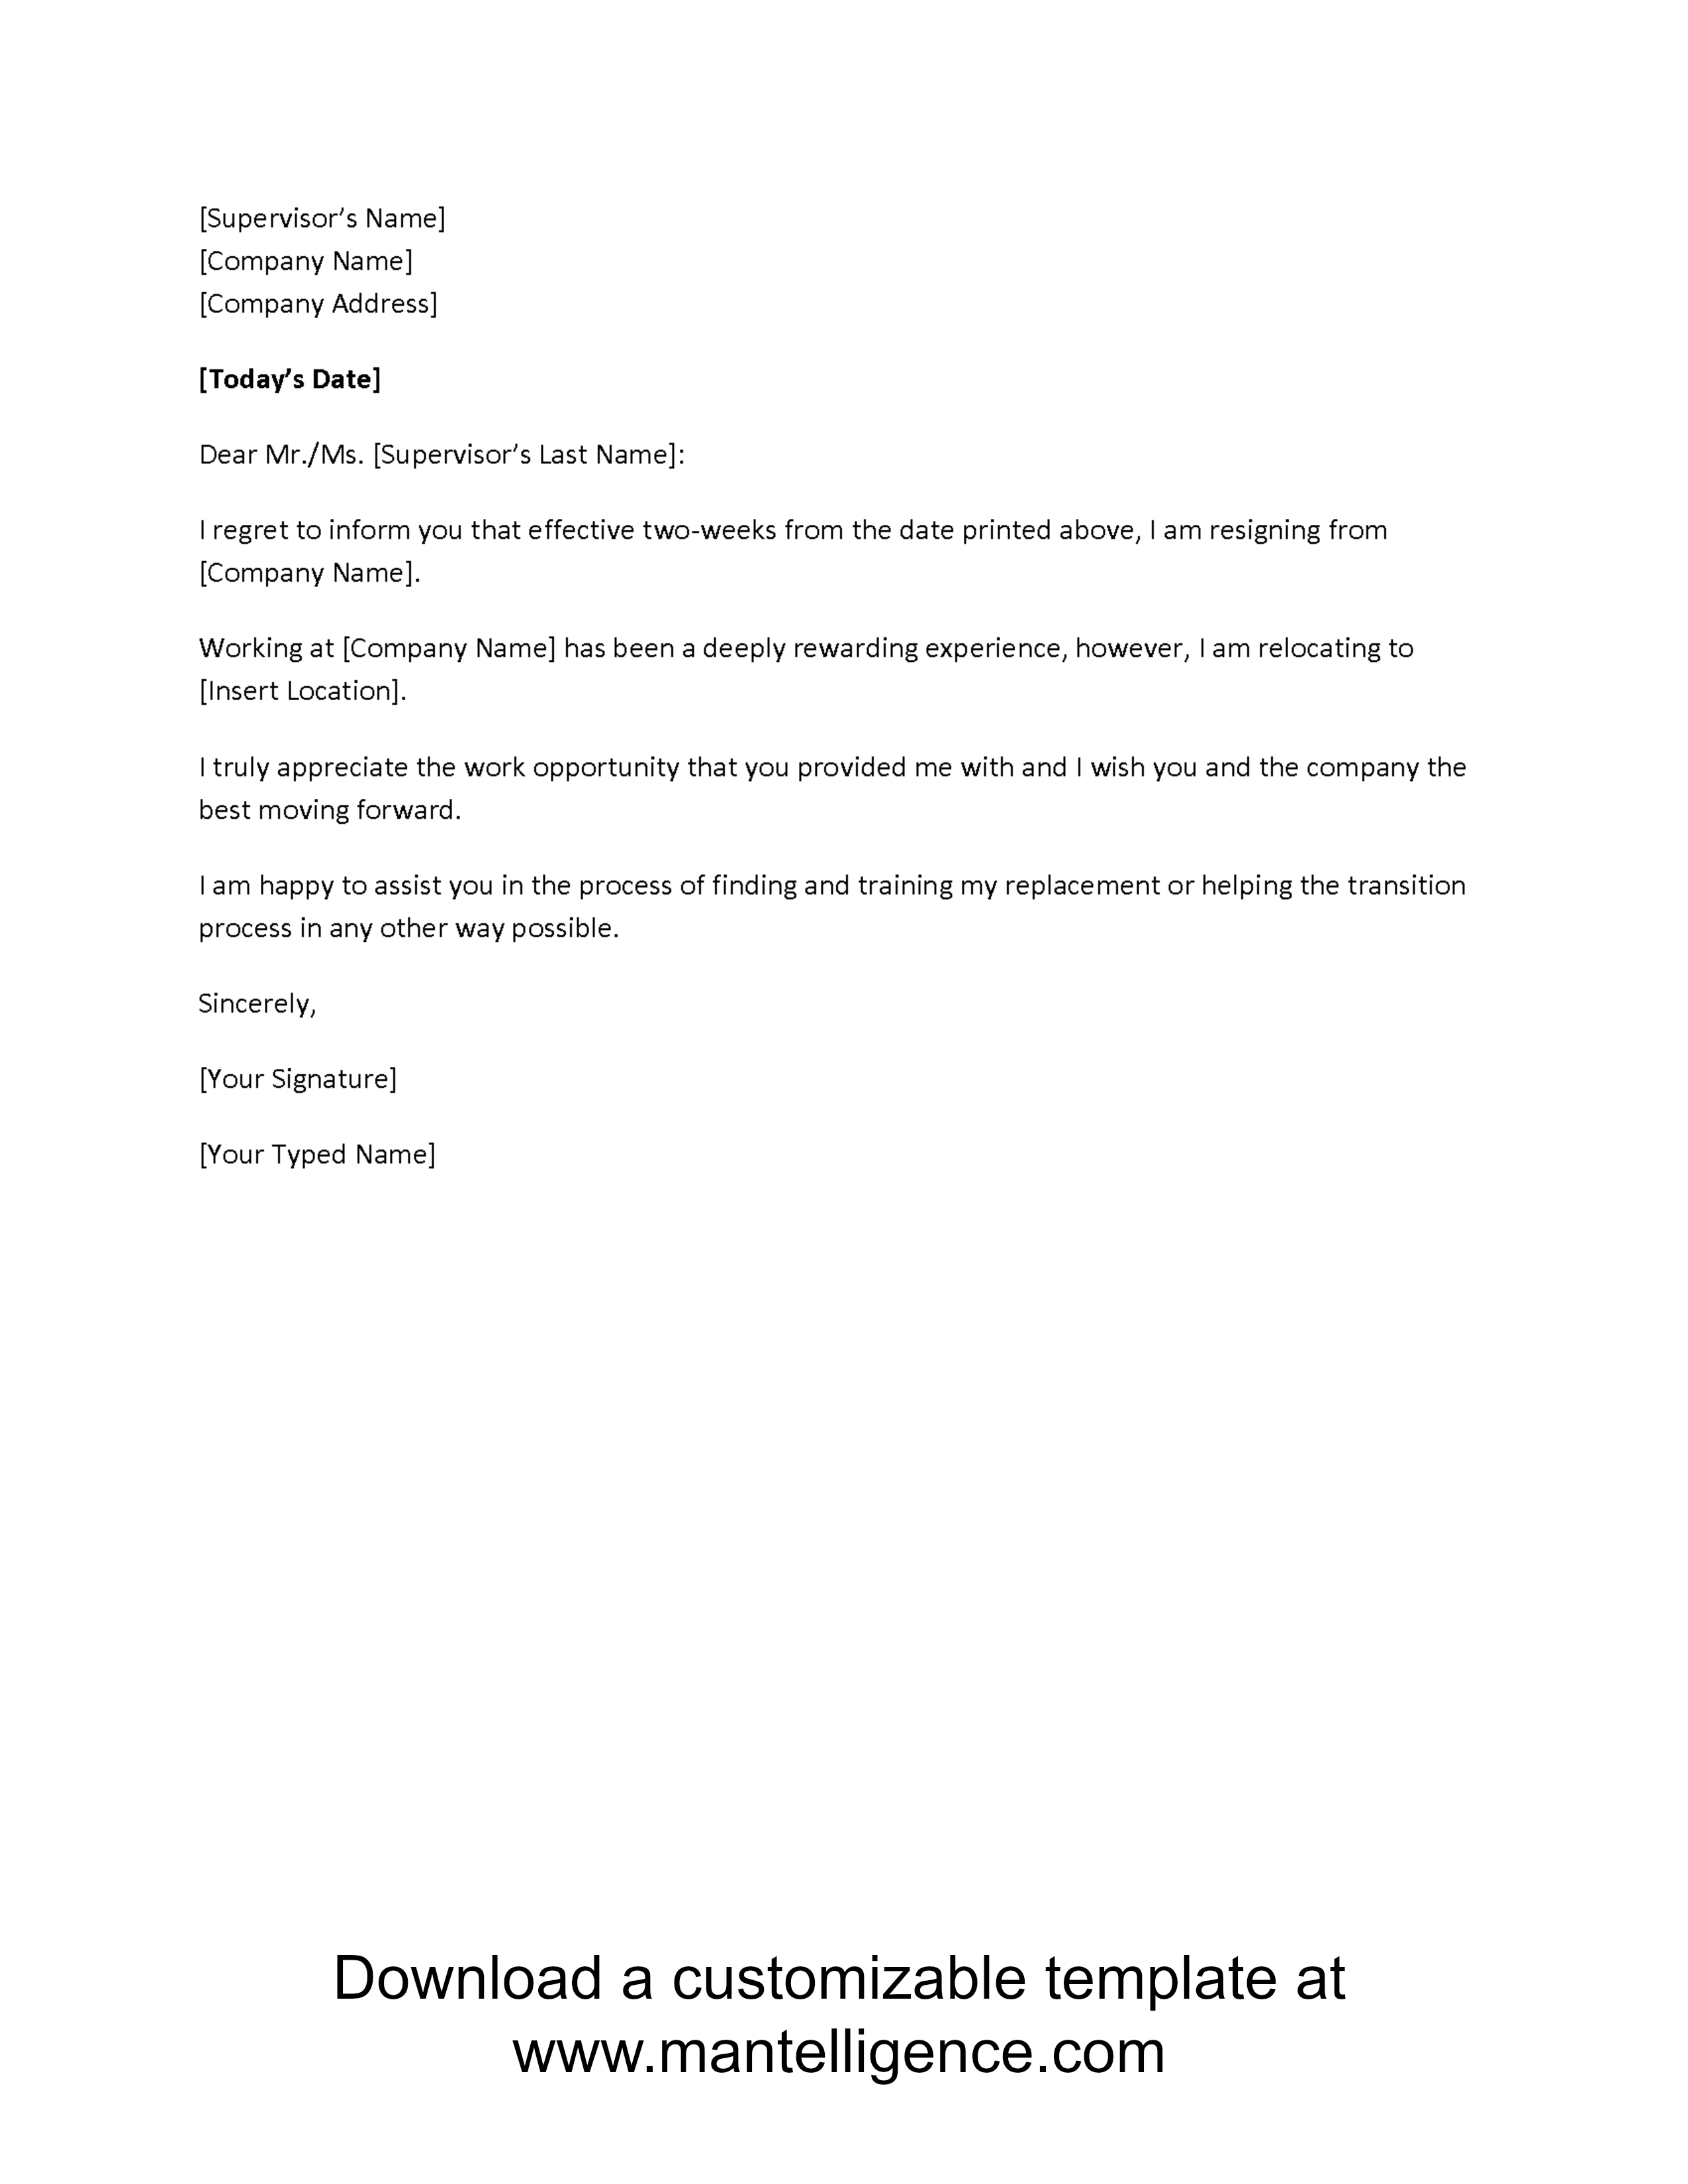 Dental Recall Letter Template - 3 Highly Professional Two Weeks Notice Letter Templates